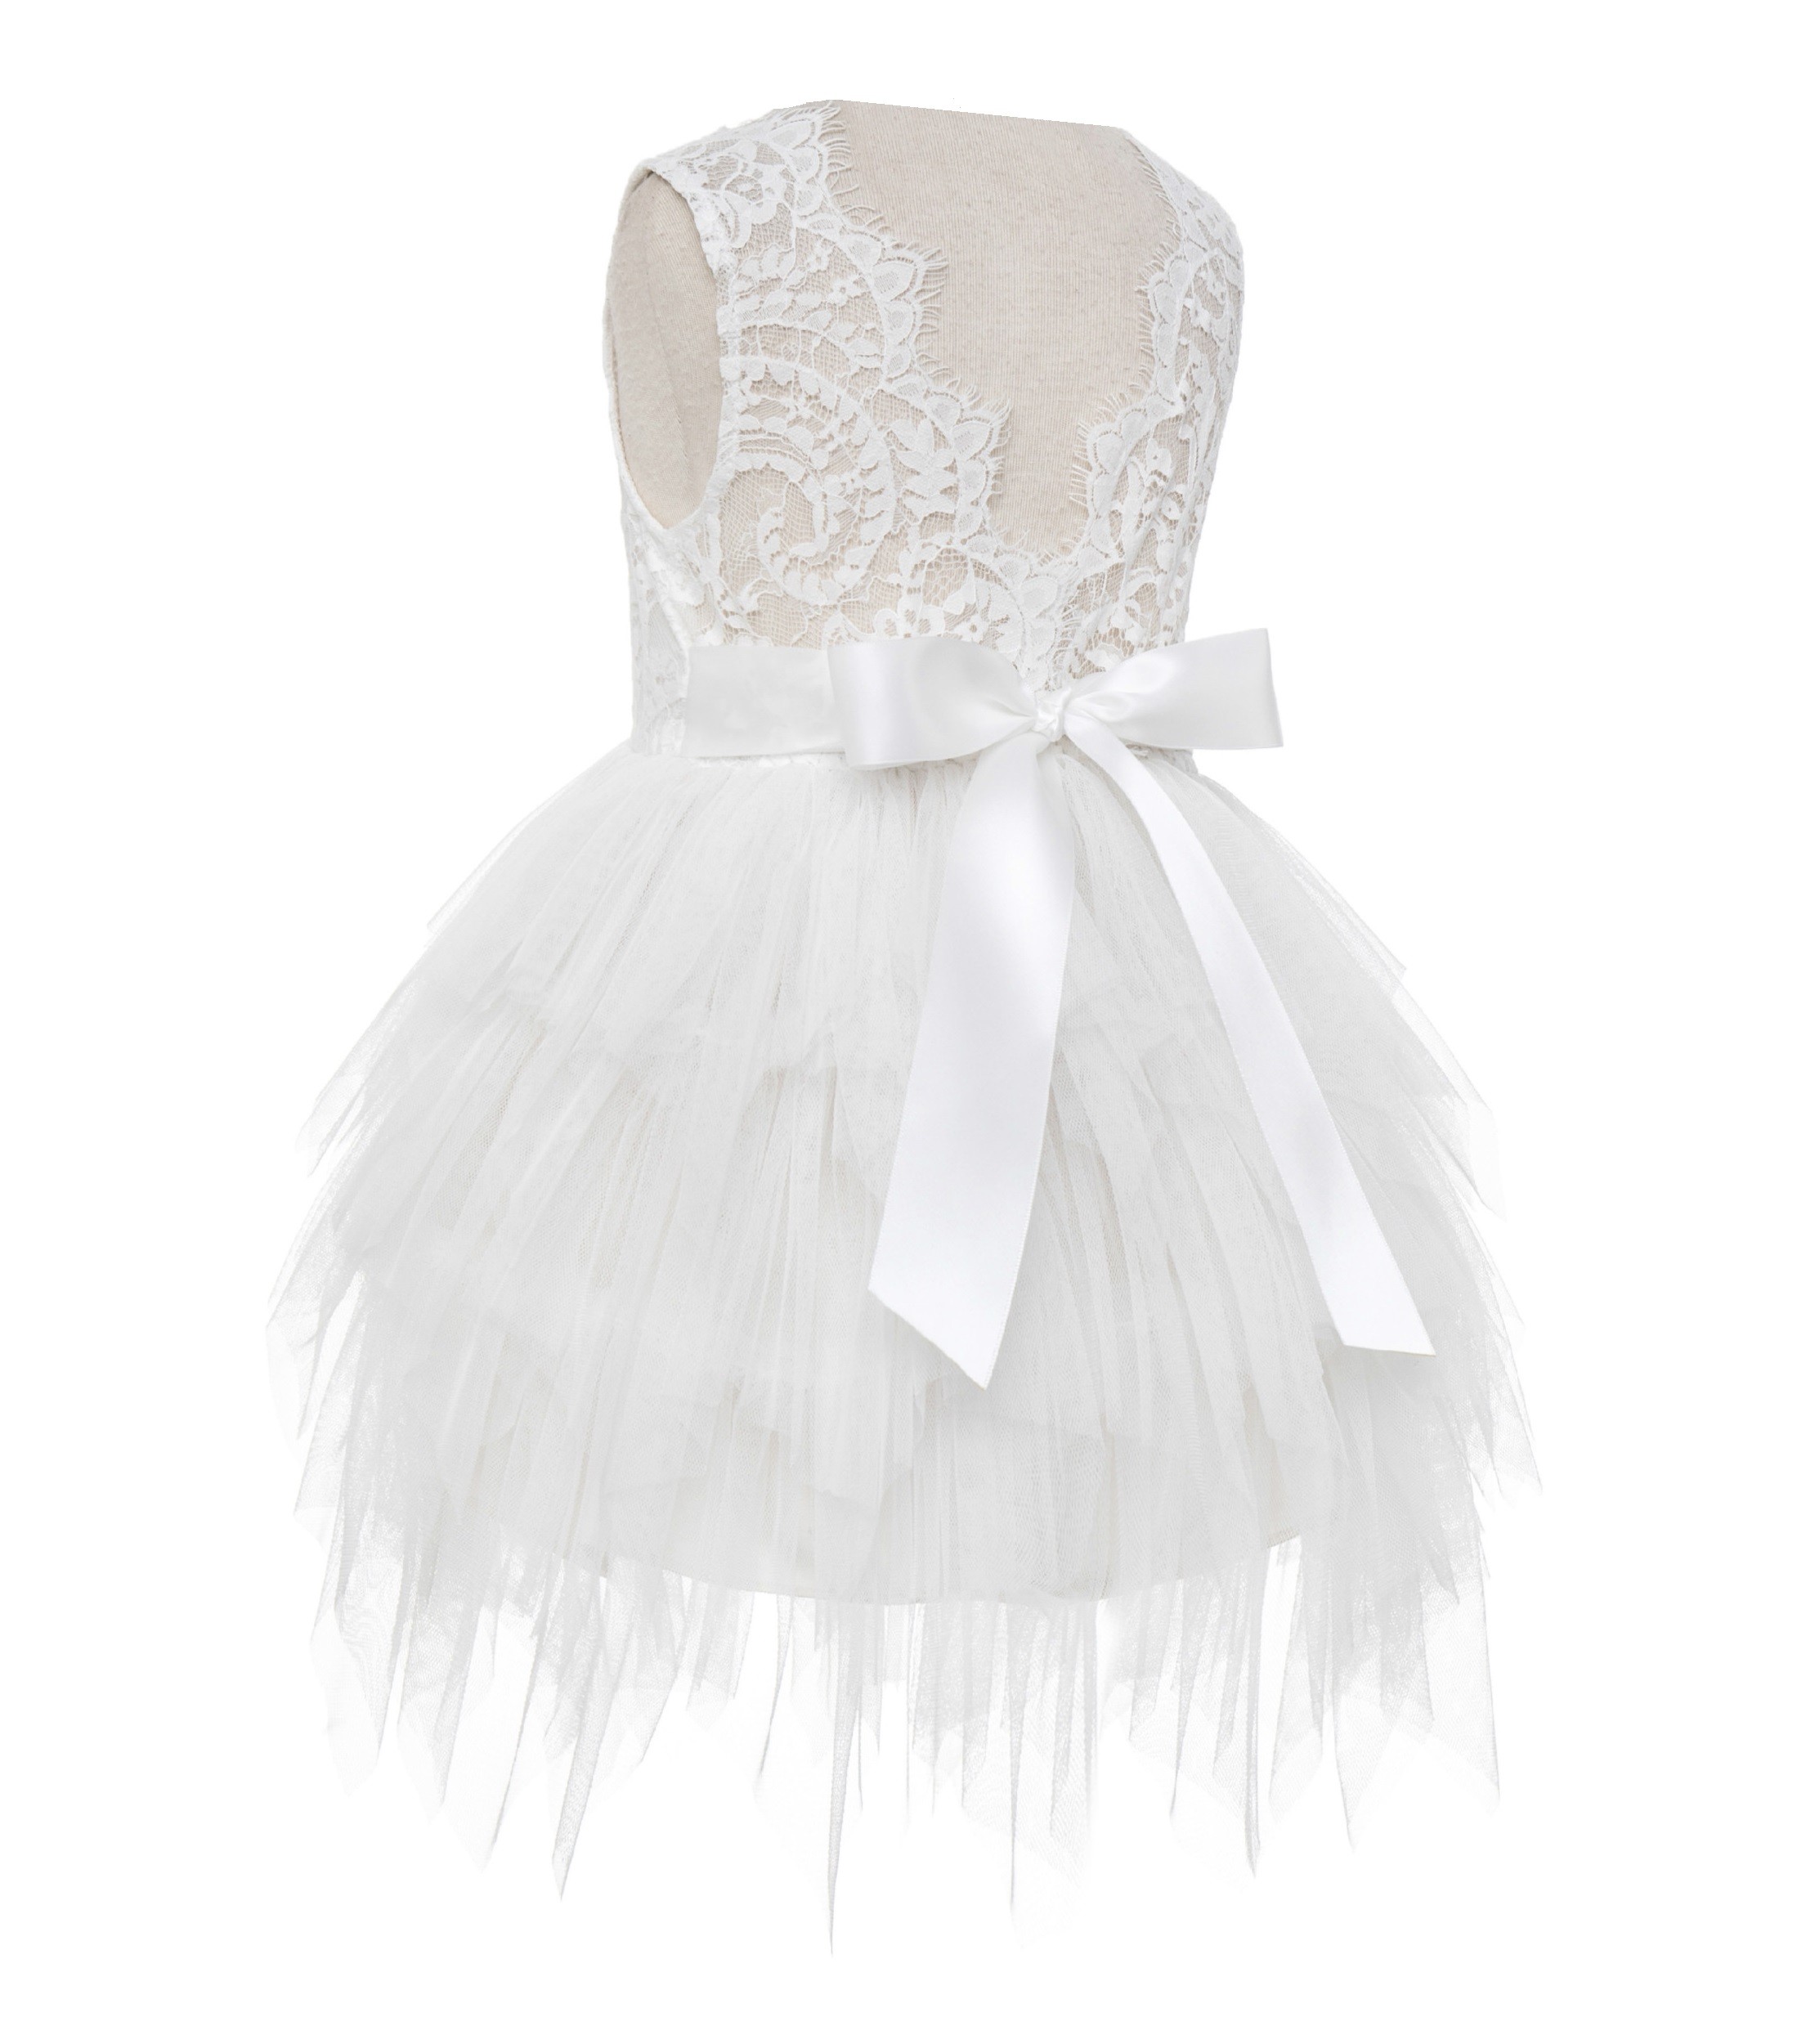 Ivory Tiered Tulle Flower Girl Dress Lace Back Dress LG6